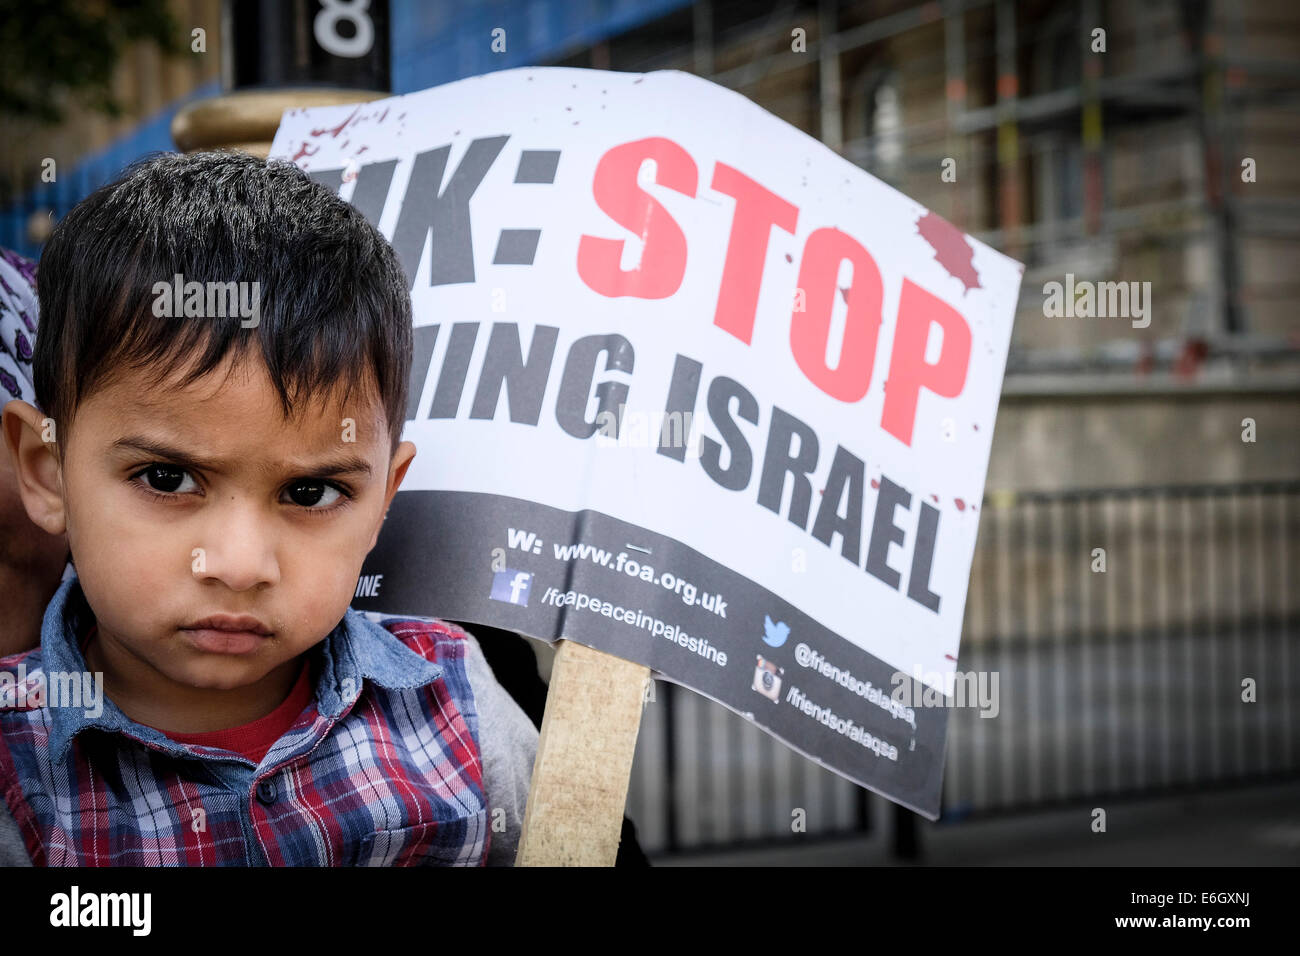 London, UK. 23rd August, 2014. The son of a pro-Palestinian protester demonstrates outside Downing street against arms sales to Israel.  Credit:  Gordon Scammell/Alamy Live News Stock Photo